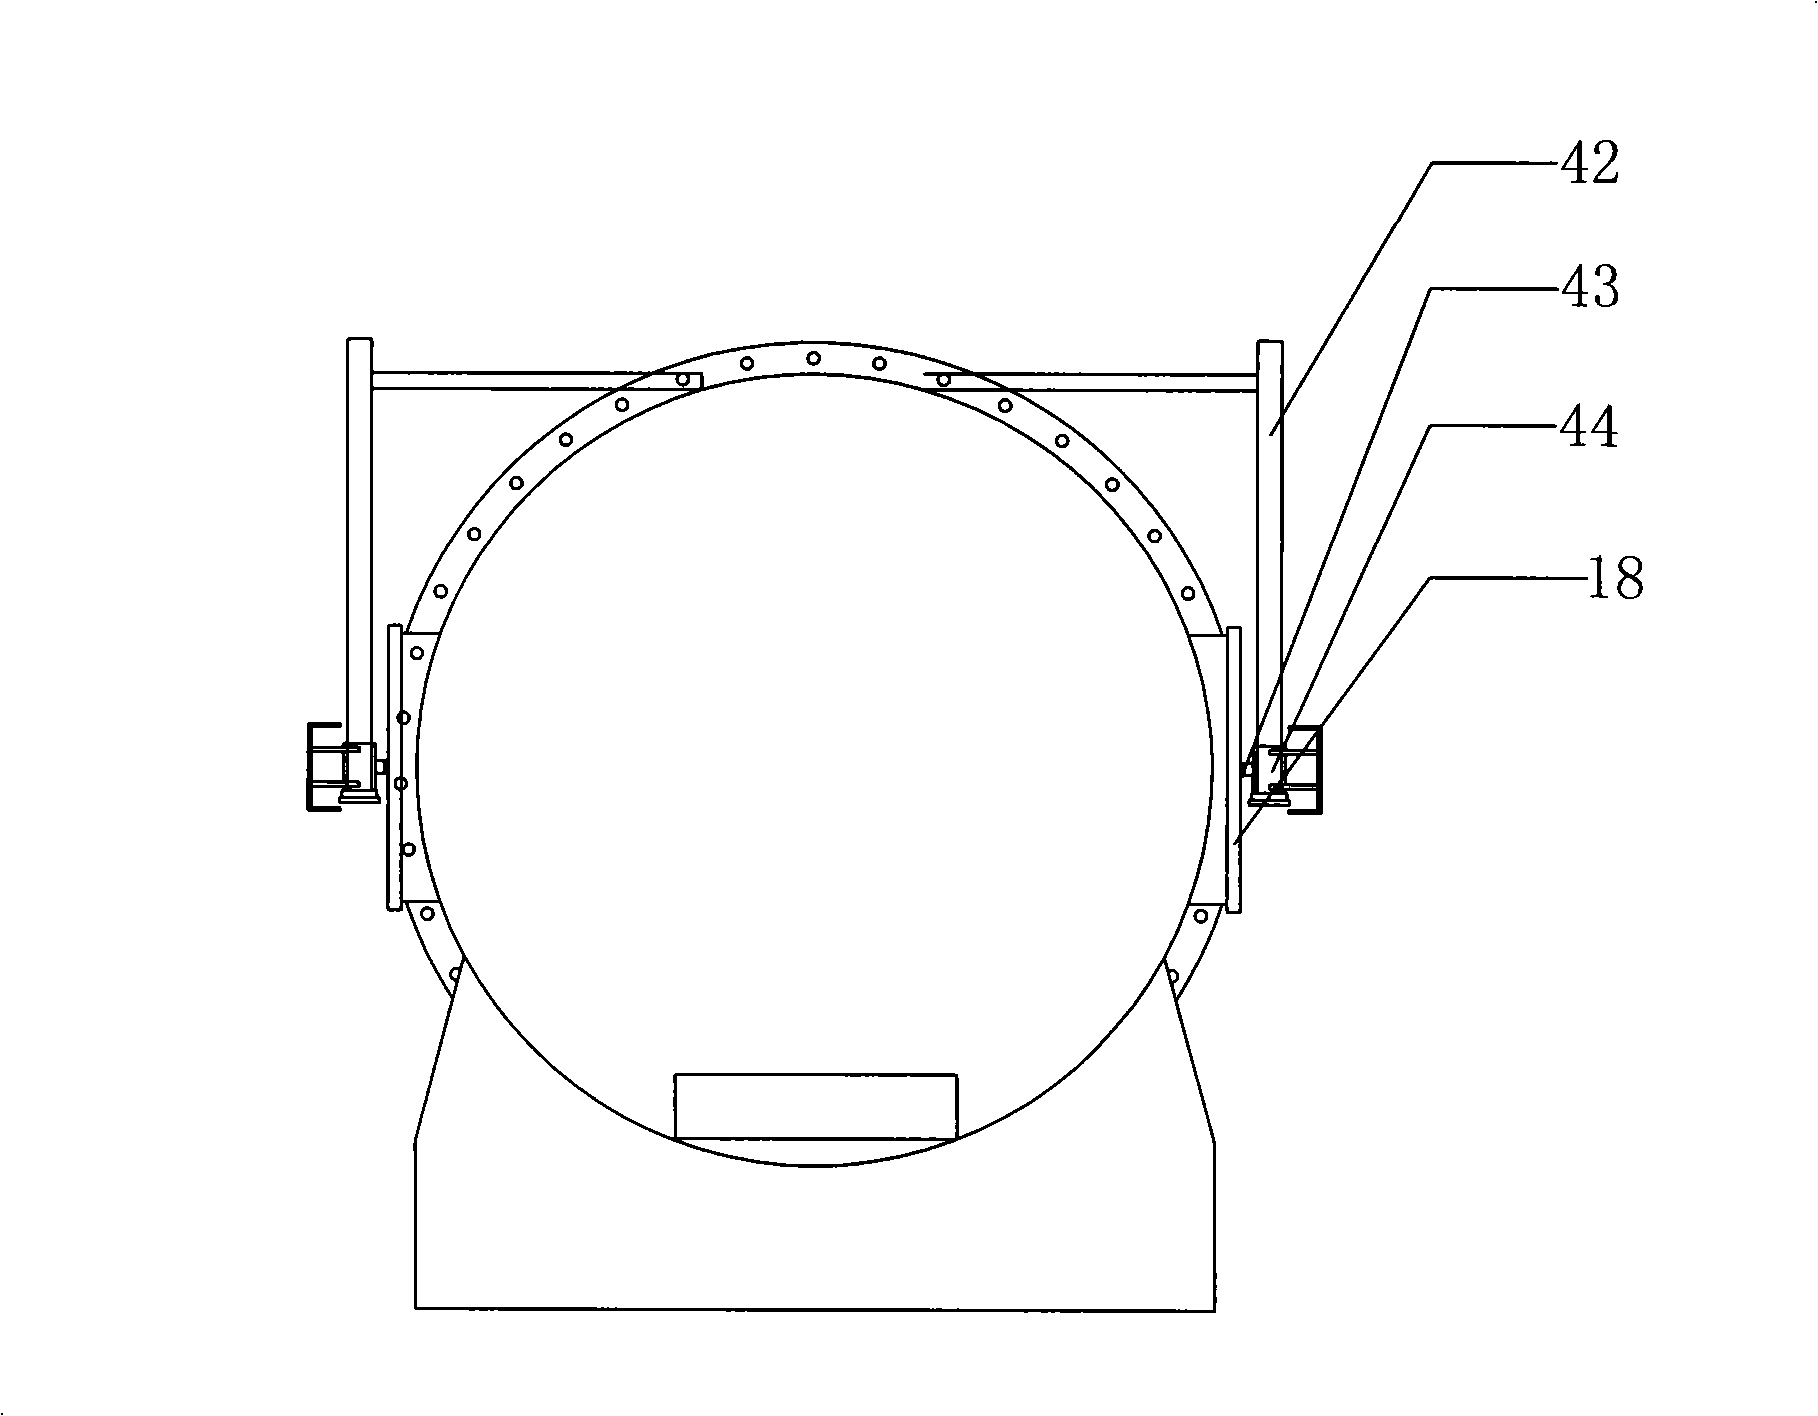 Cleaning structure of industry parts washer